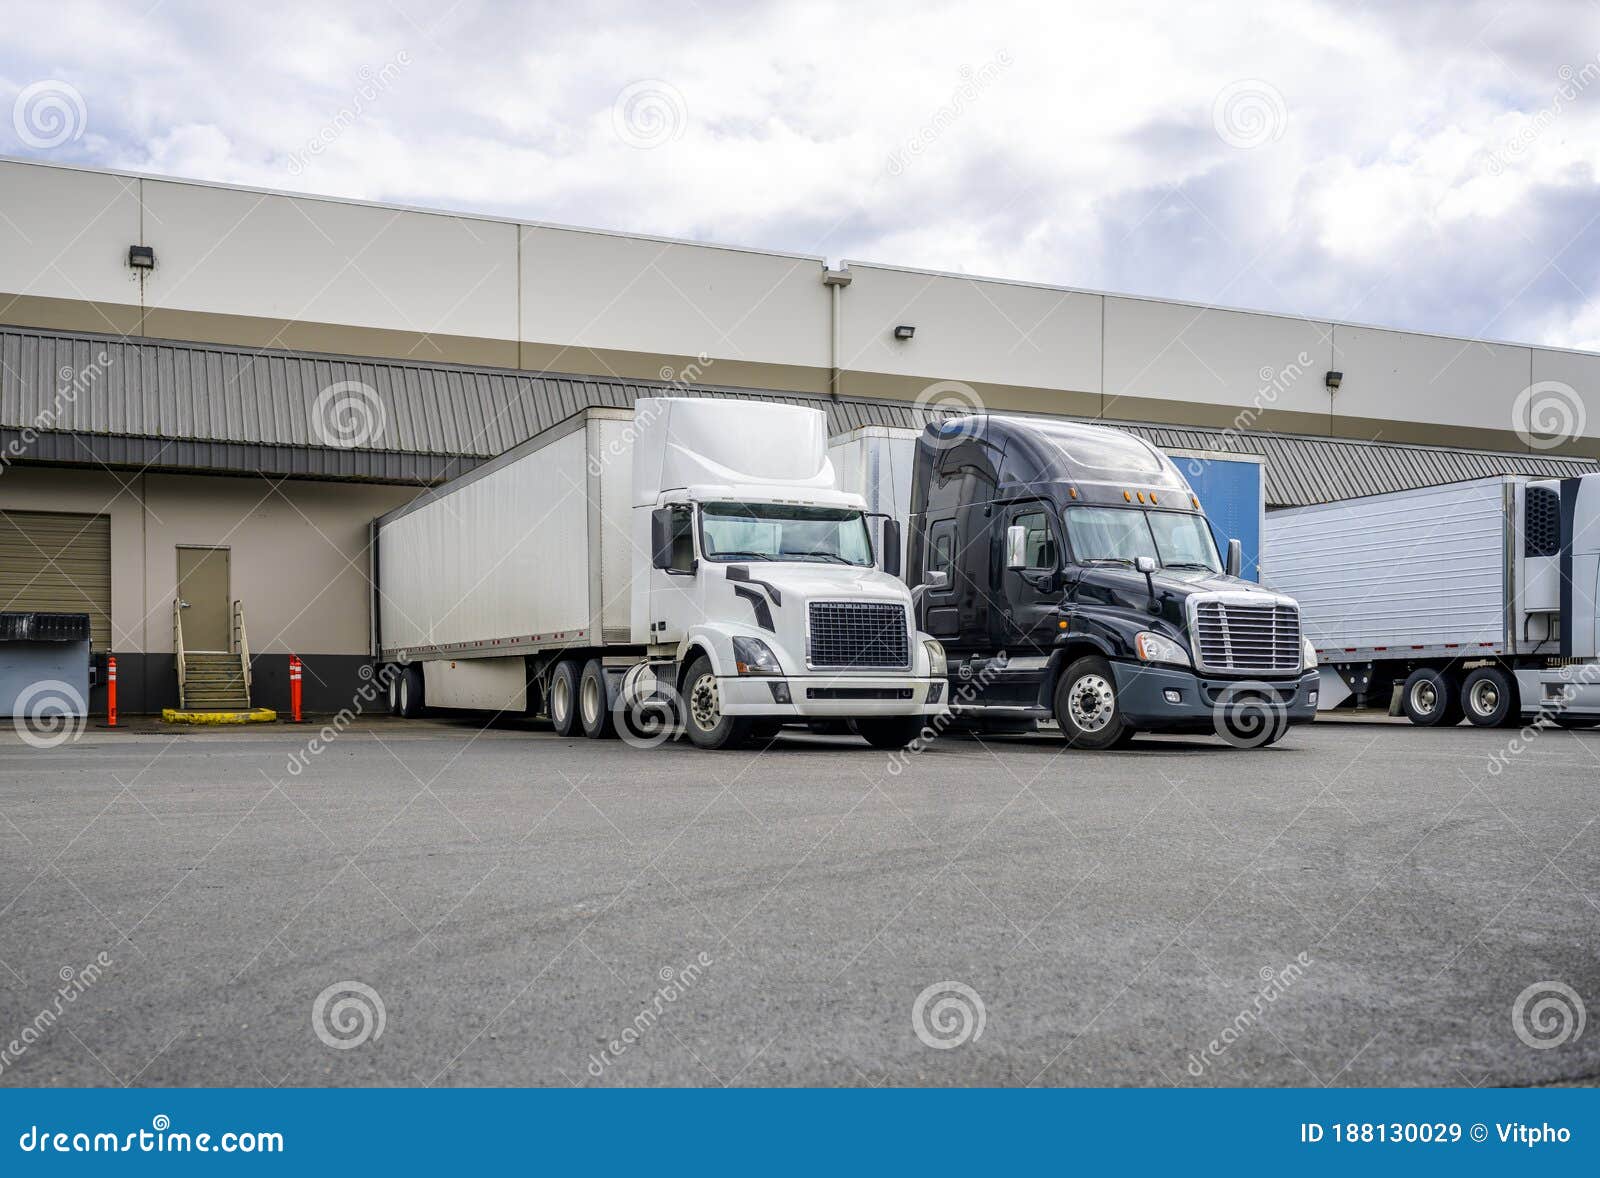 black and white big rigs semi trucks with semi trailers loading cargo at warehouse dock with gates for each